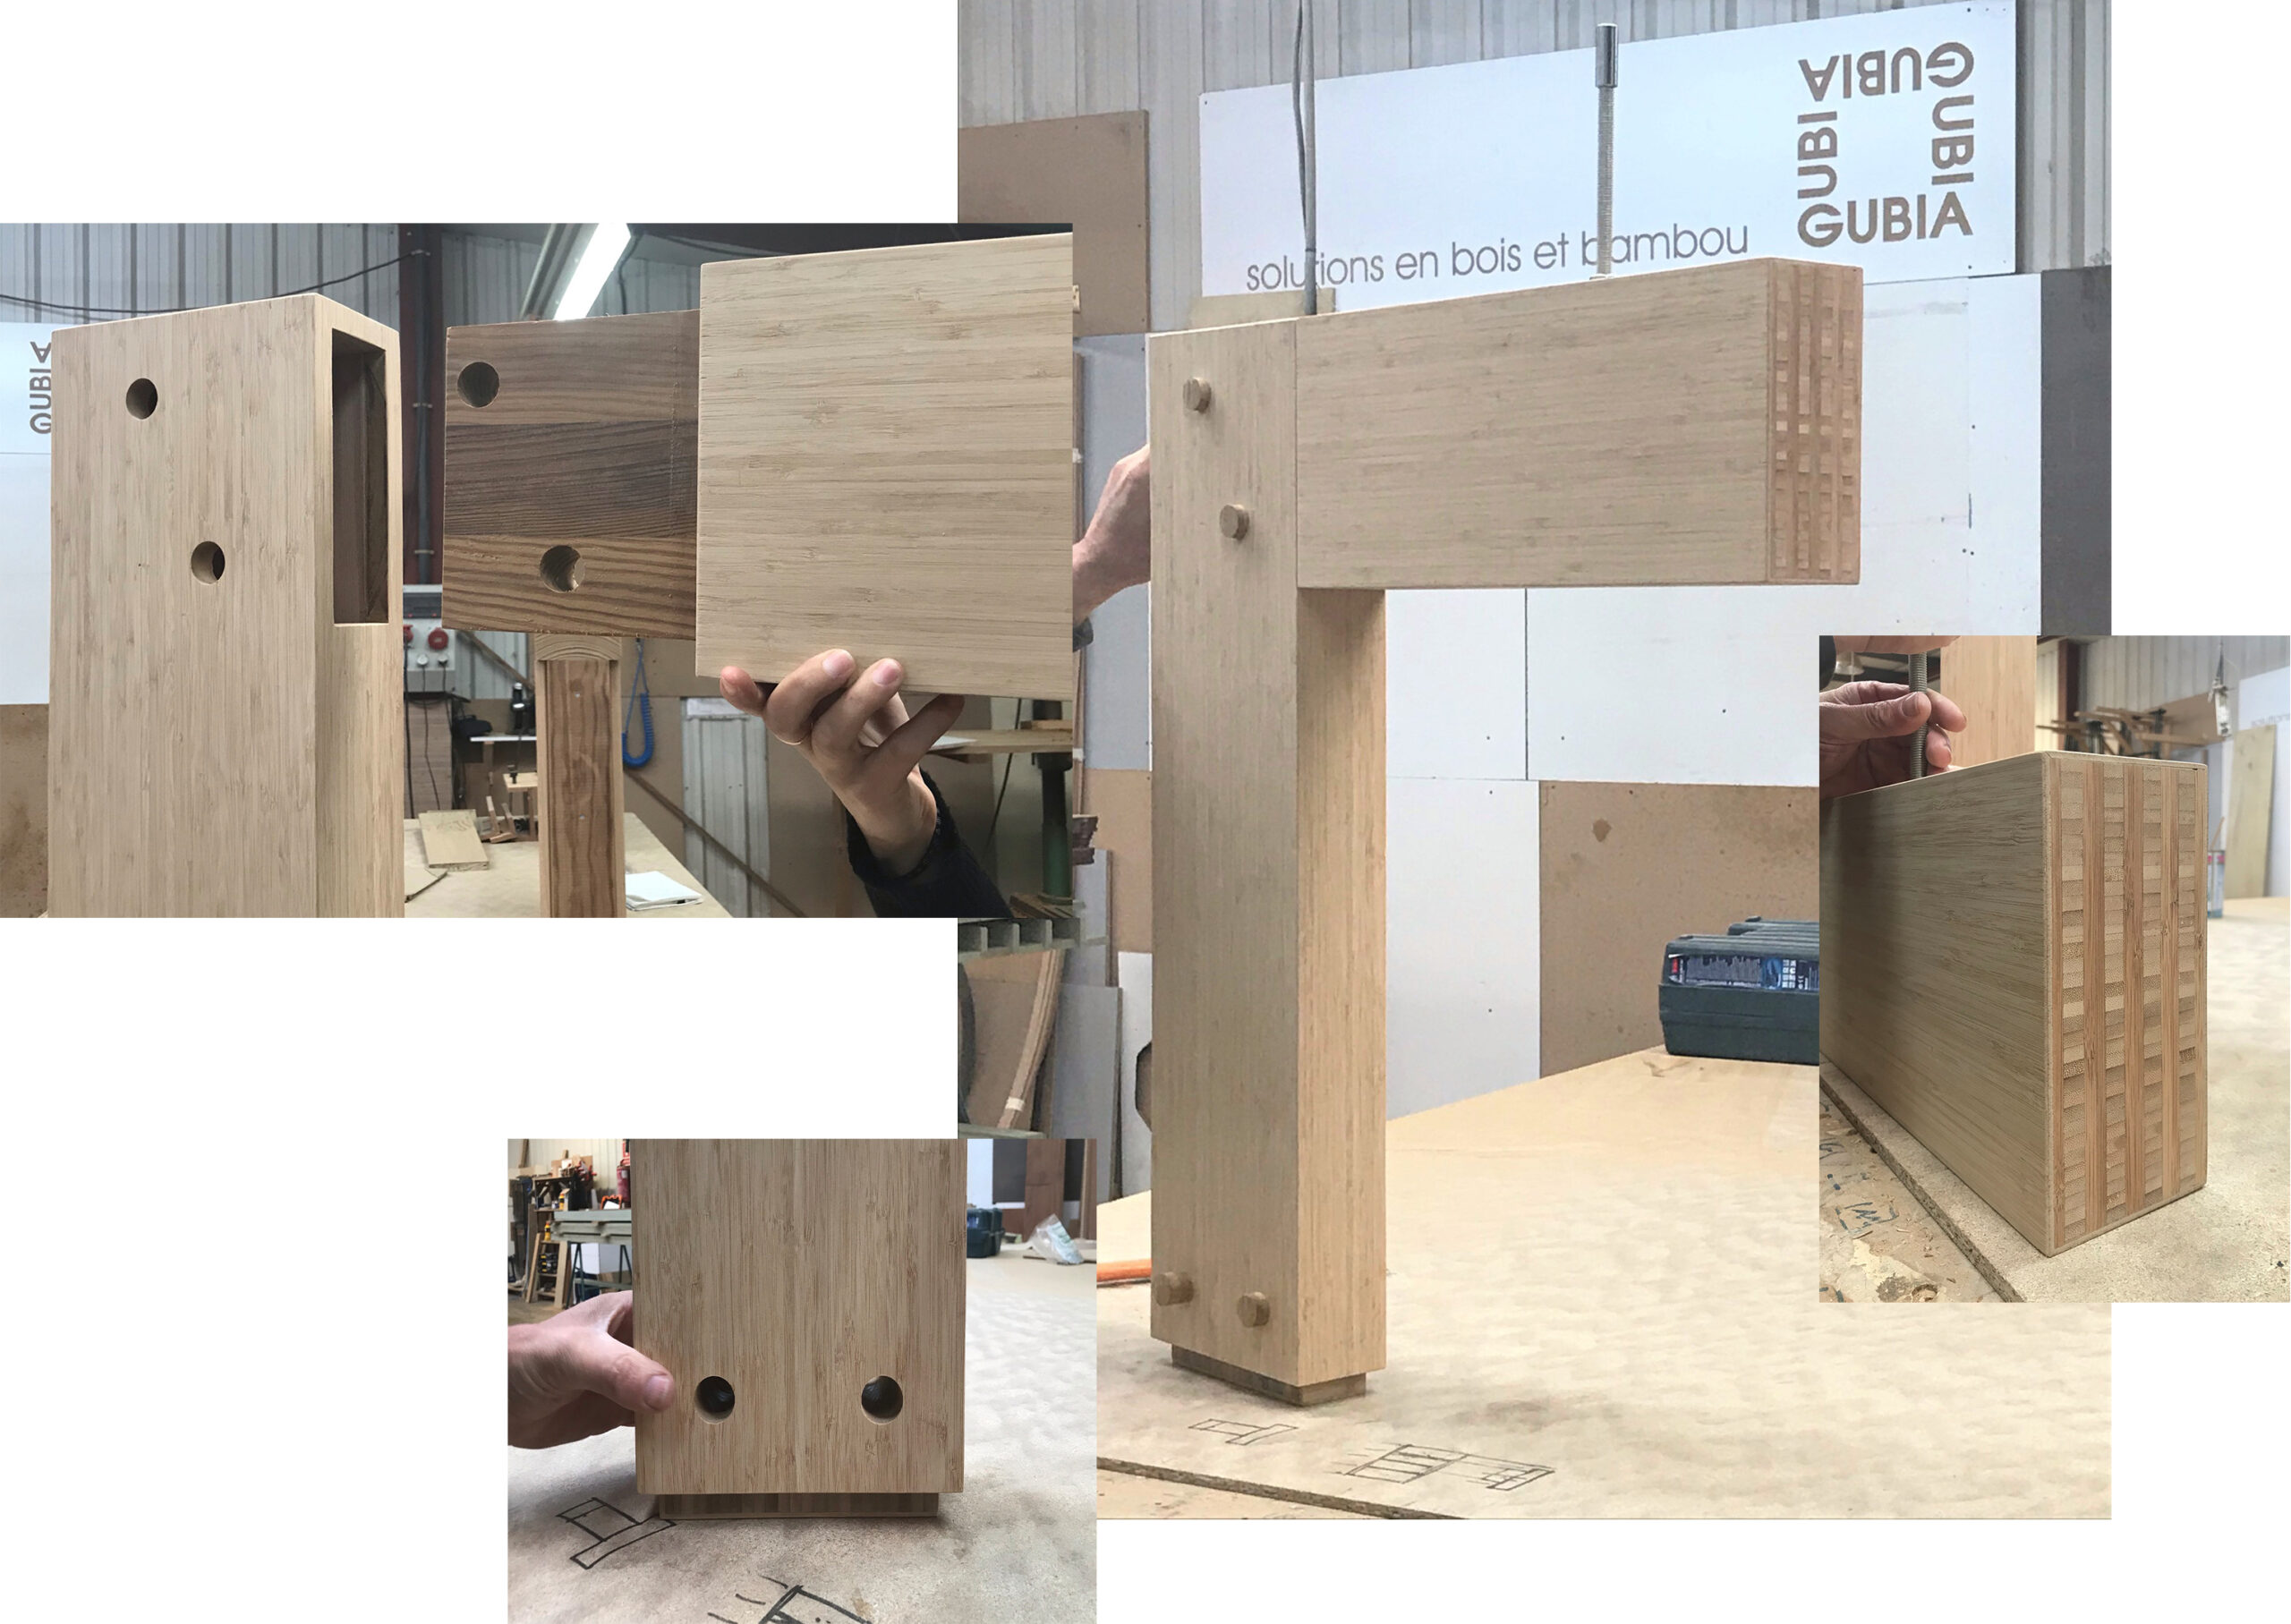 Bamboo porticos under construction and testing